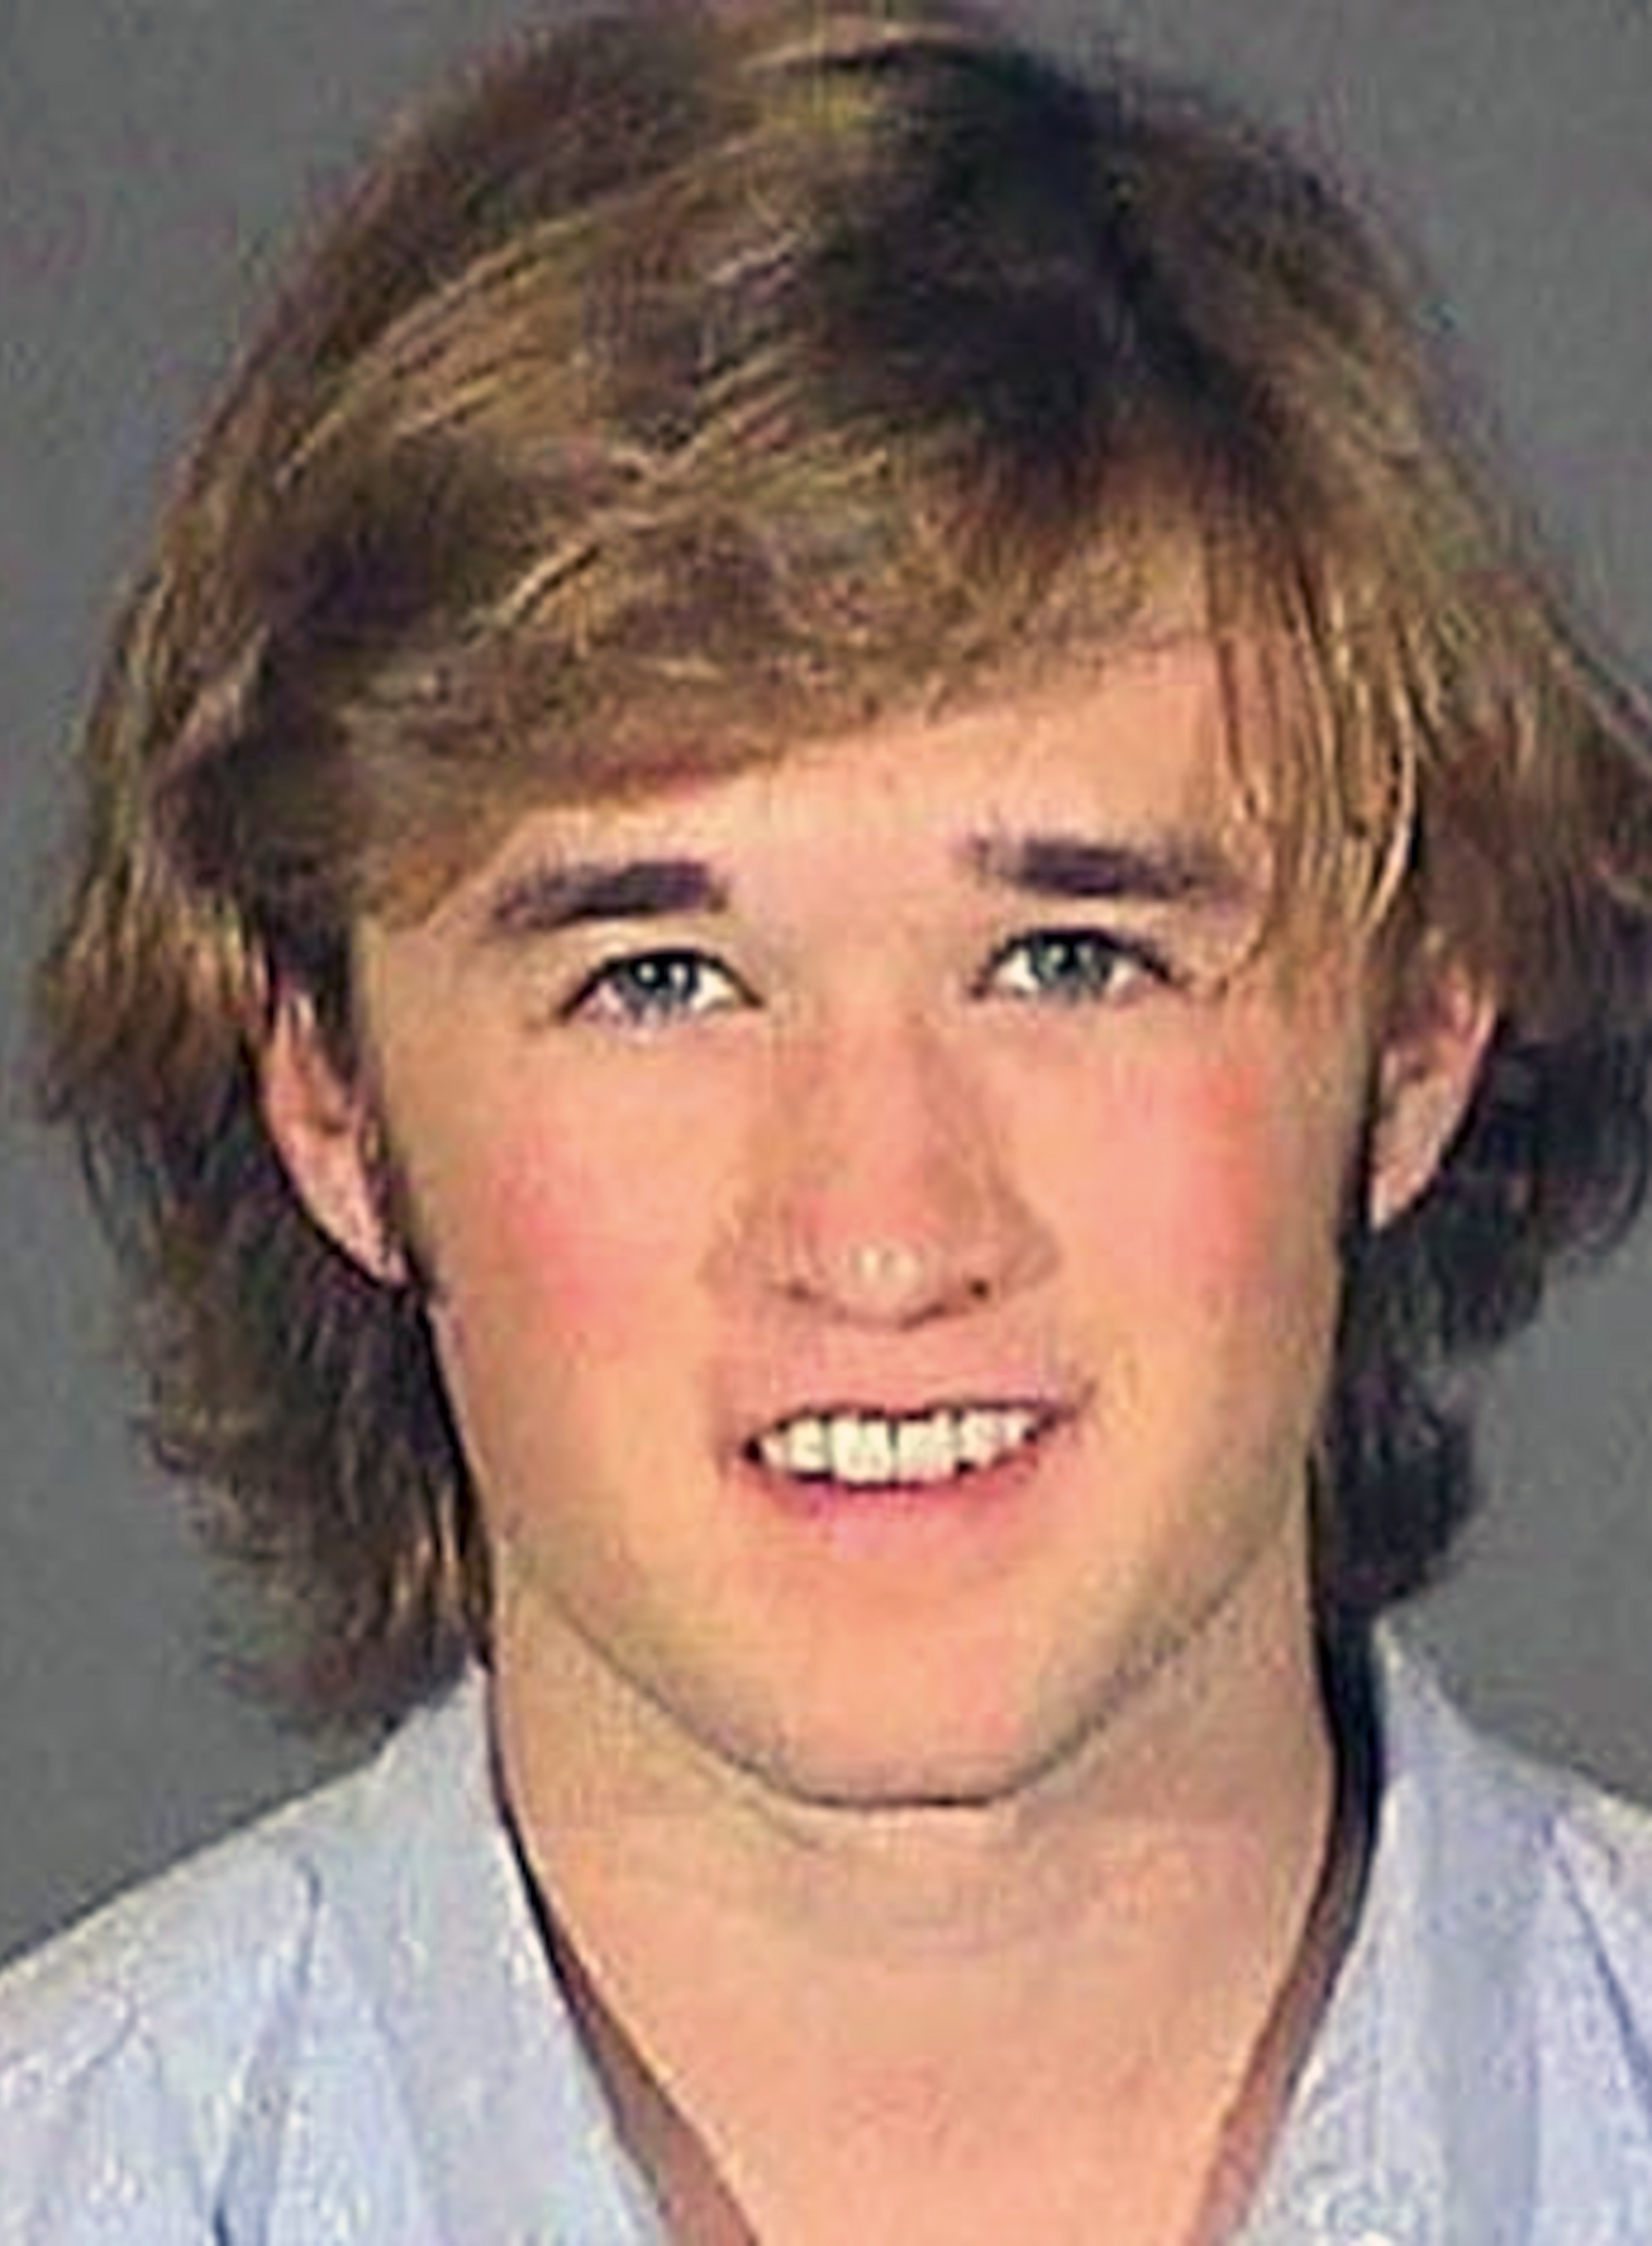 Haley Osment in a mug shot following his arrest in 2006 in Los Angeles, California. | Source: Getty Images